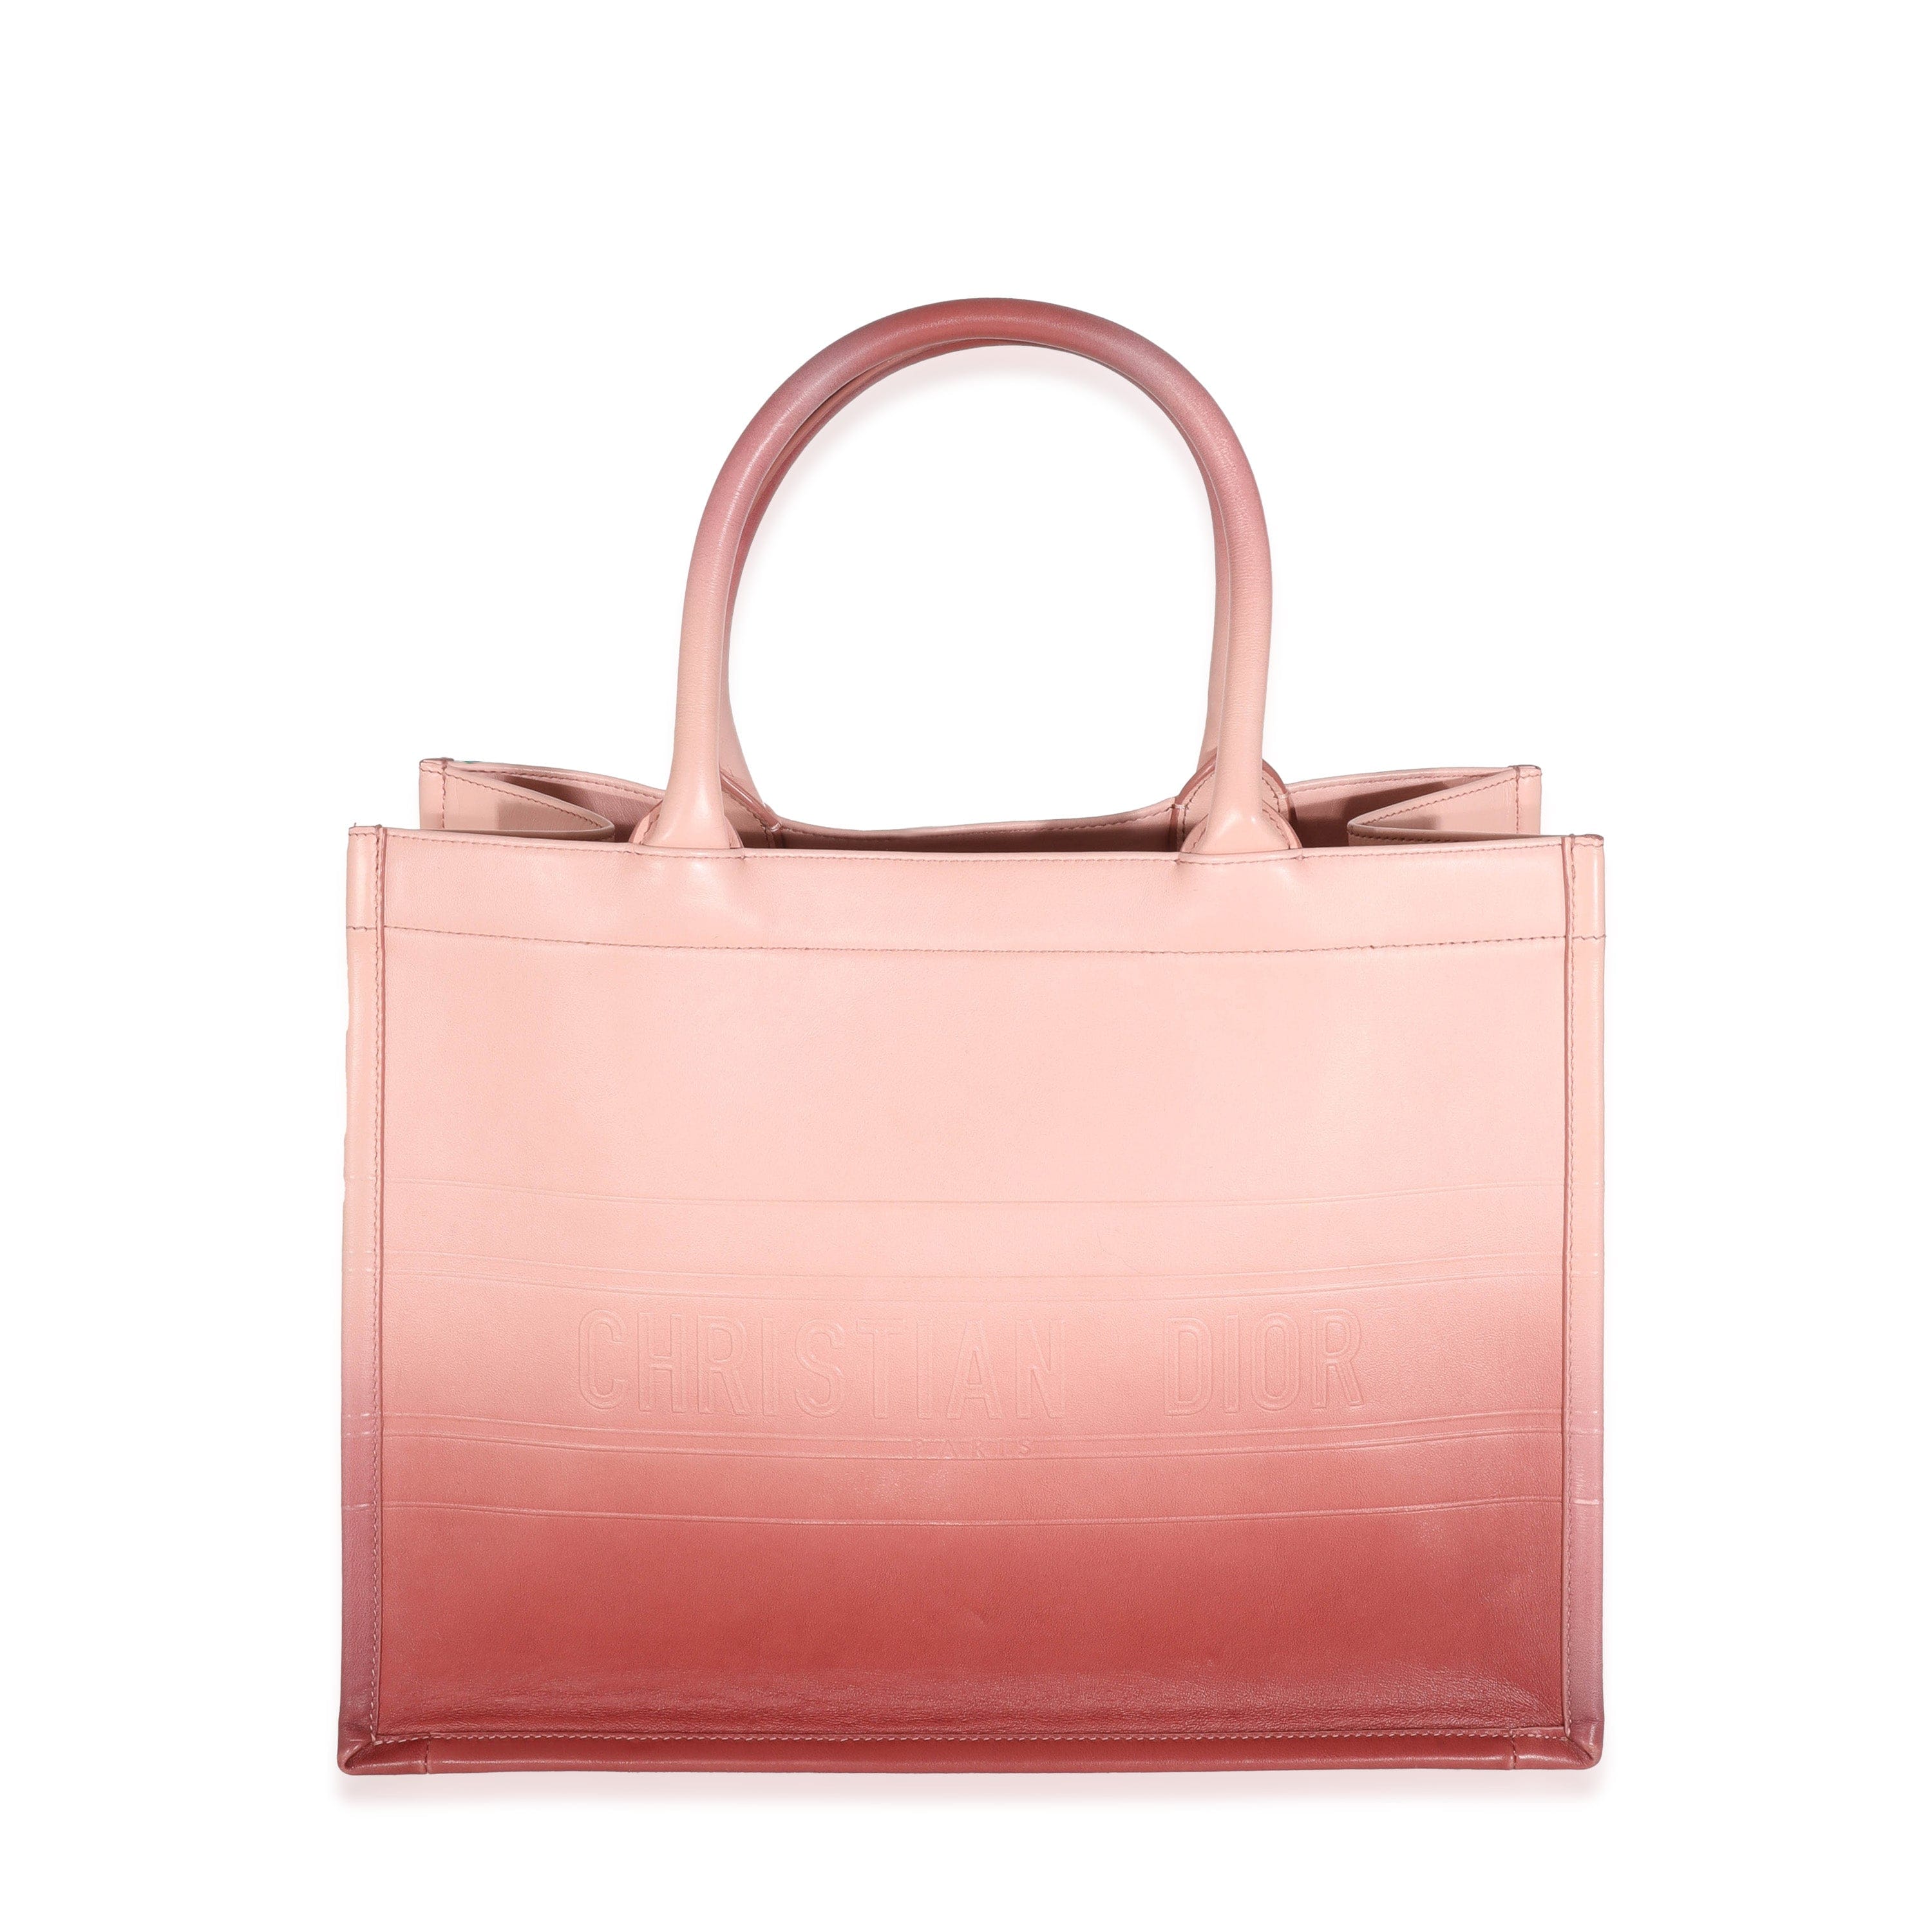 Christian Dior Christian Dior Pink Gradient Leather Medium Book Tote